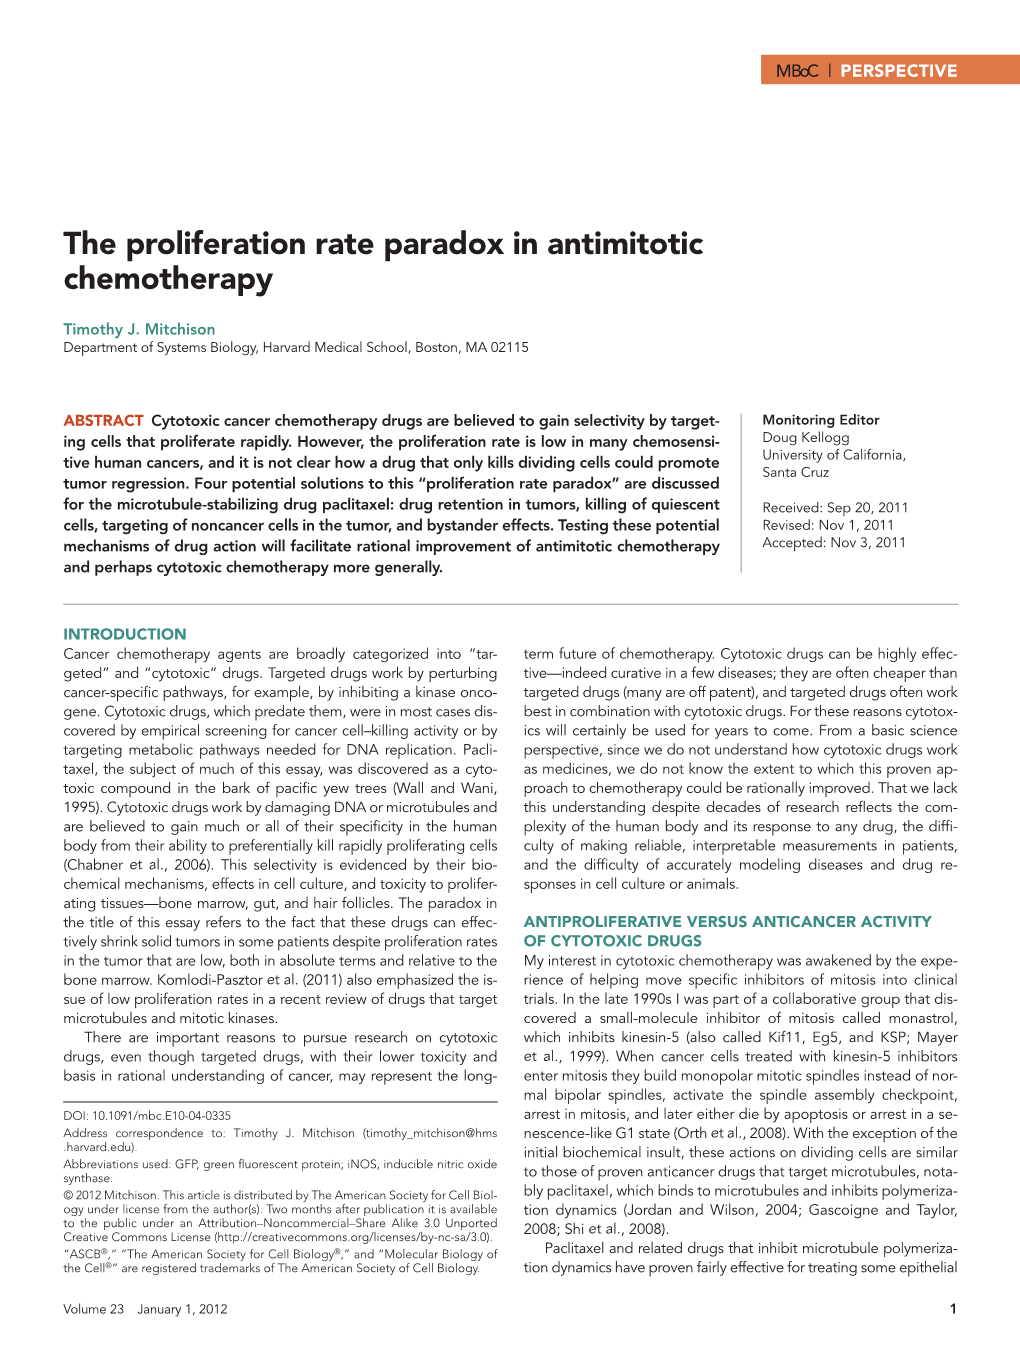 The Proliferation Rate Paradox in Antimitotic Chemotherapy